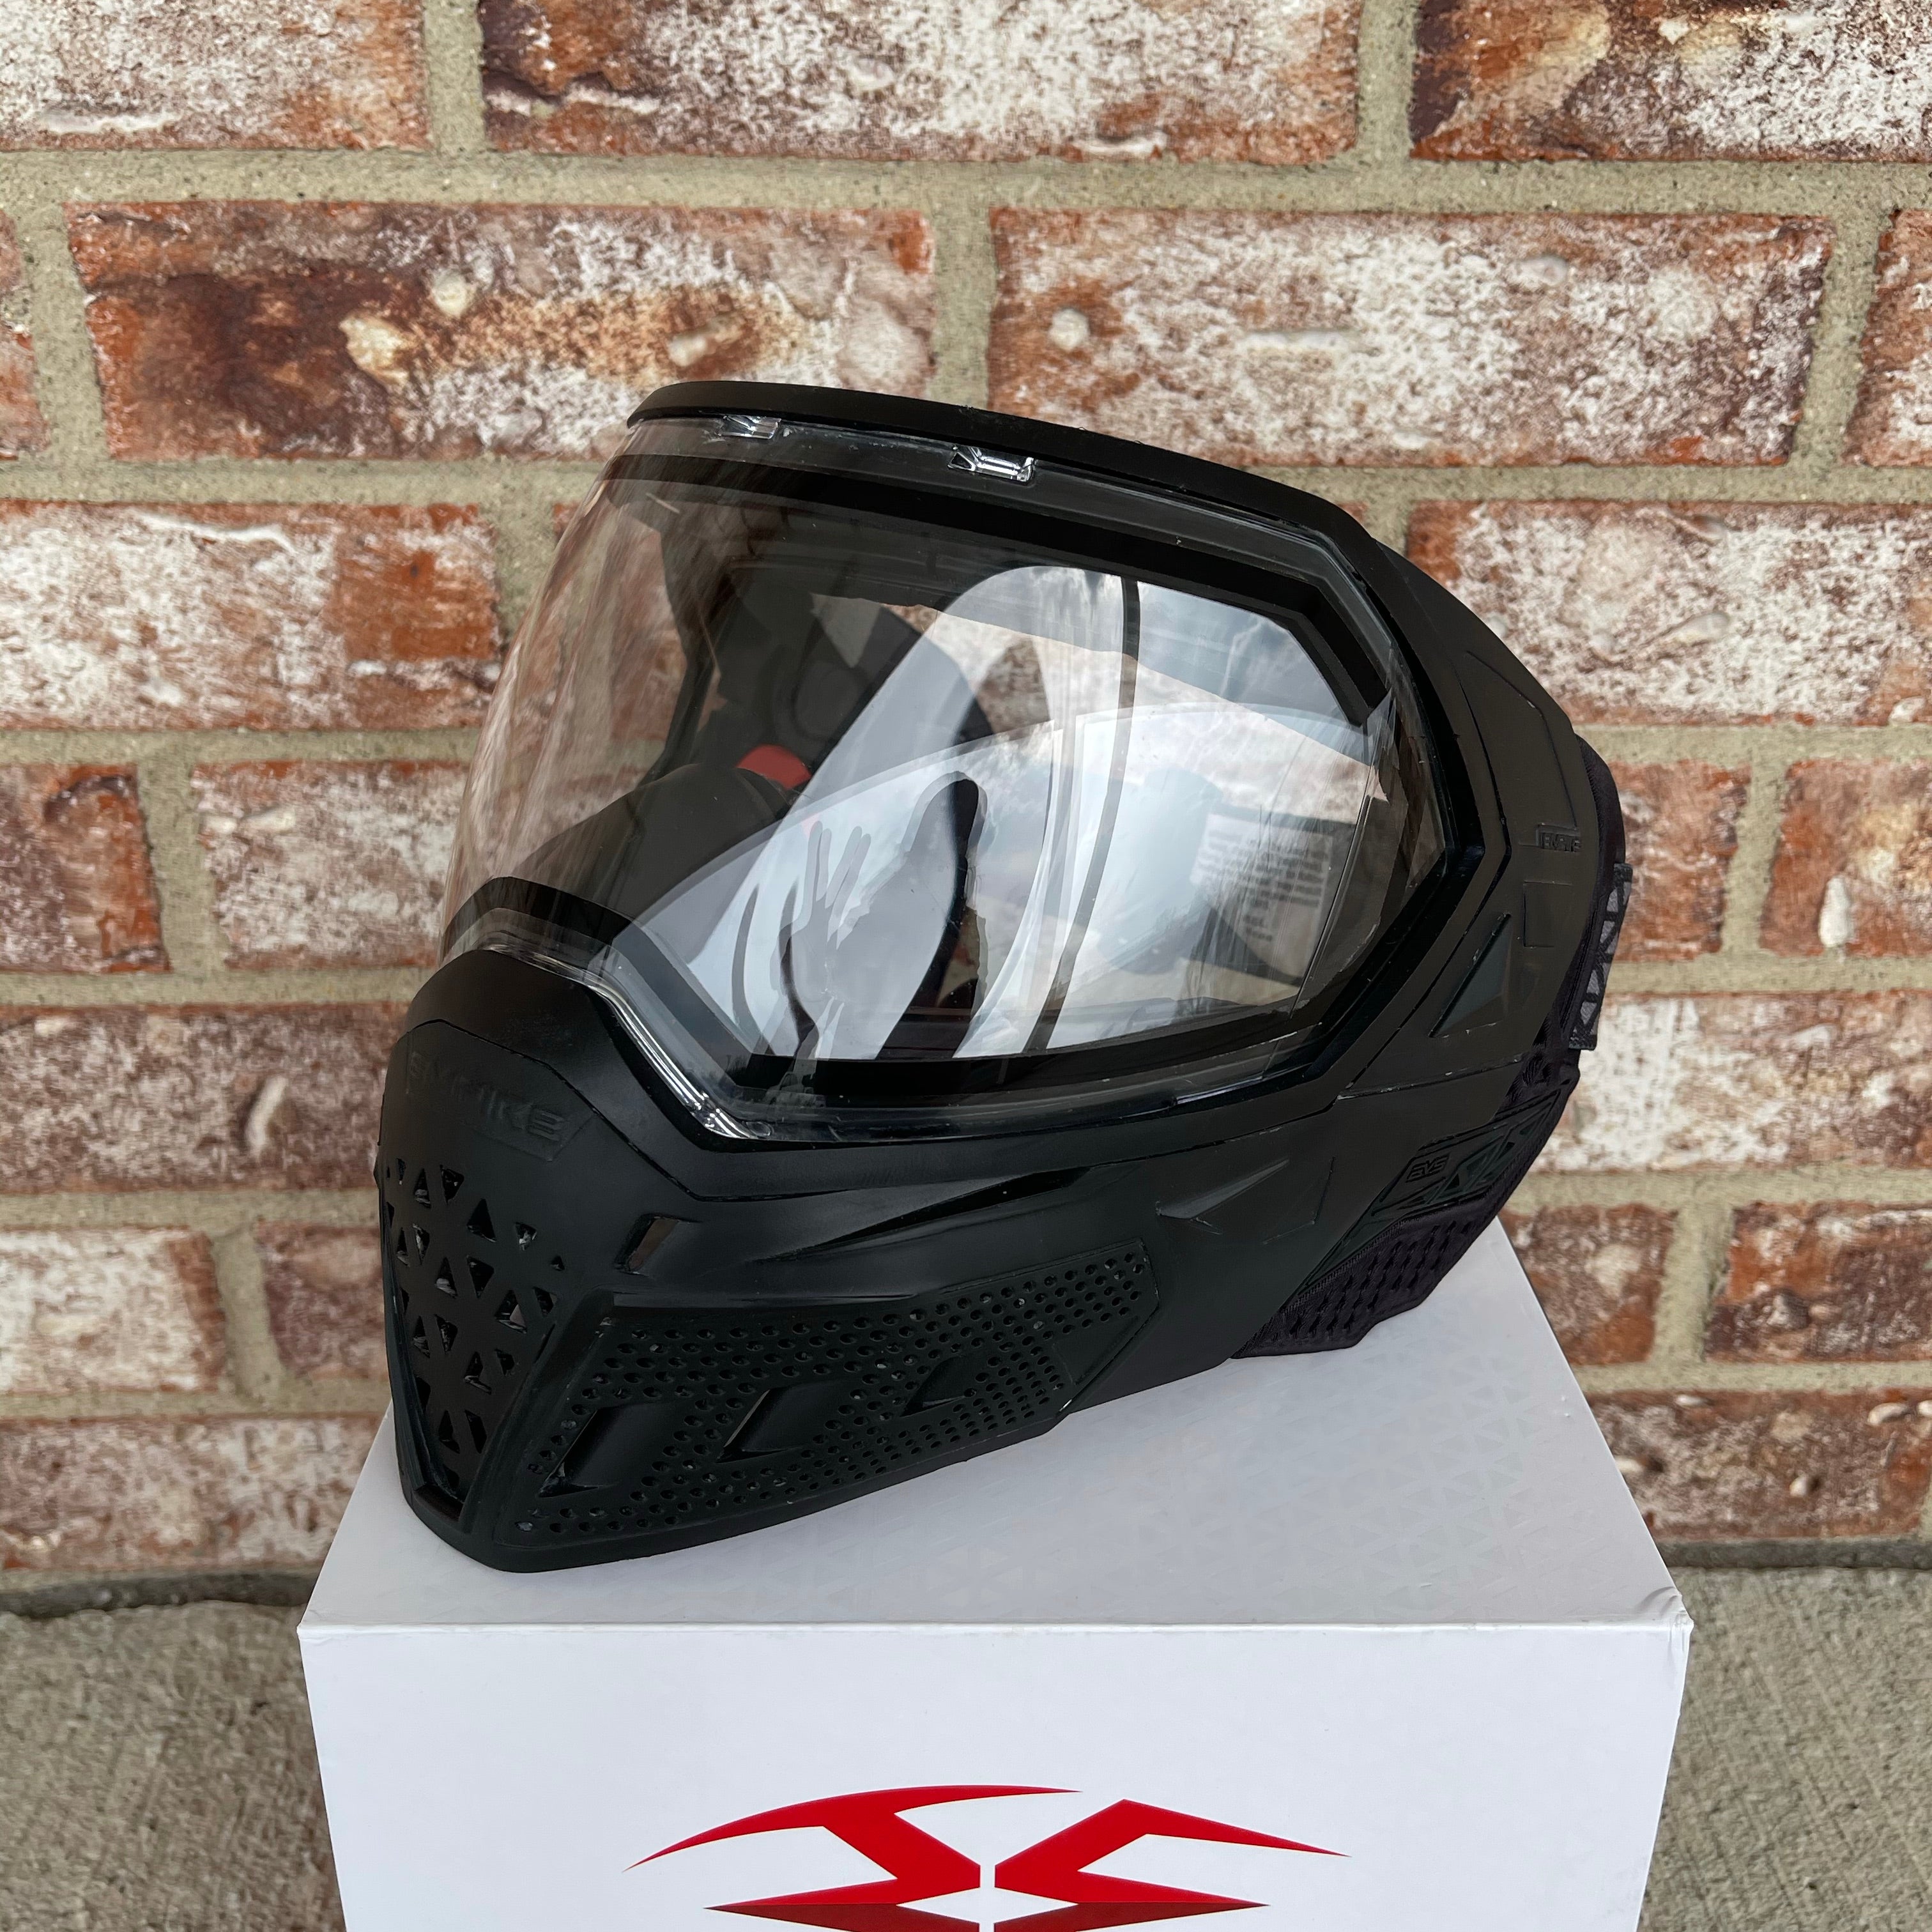 Used Empire EVS Paintball Mask - Black